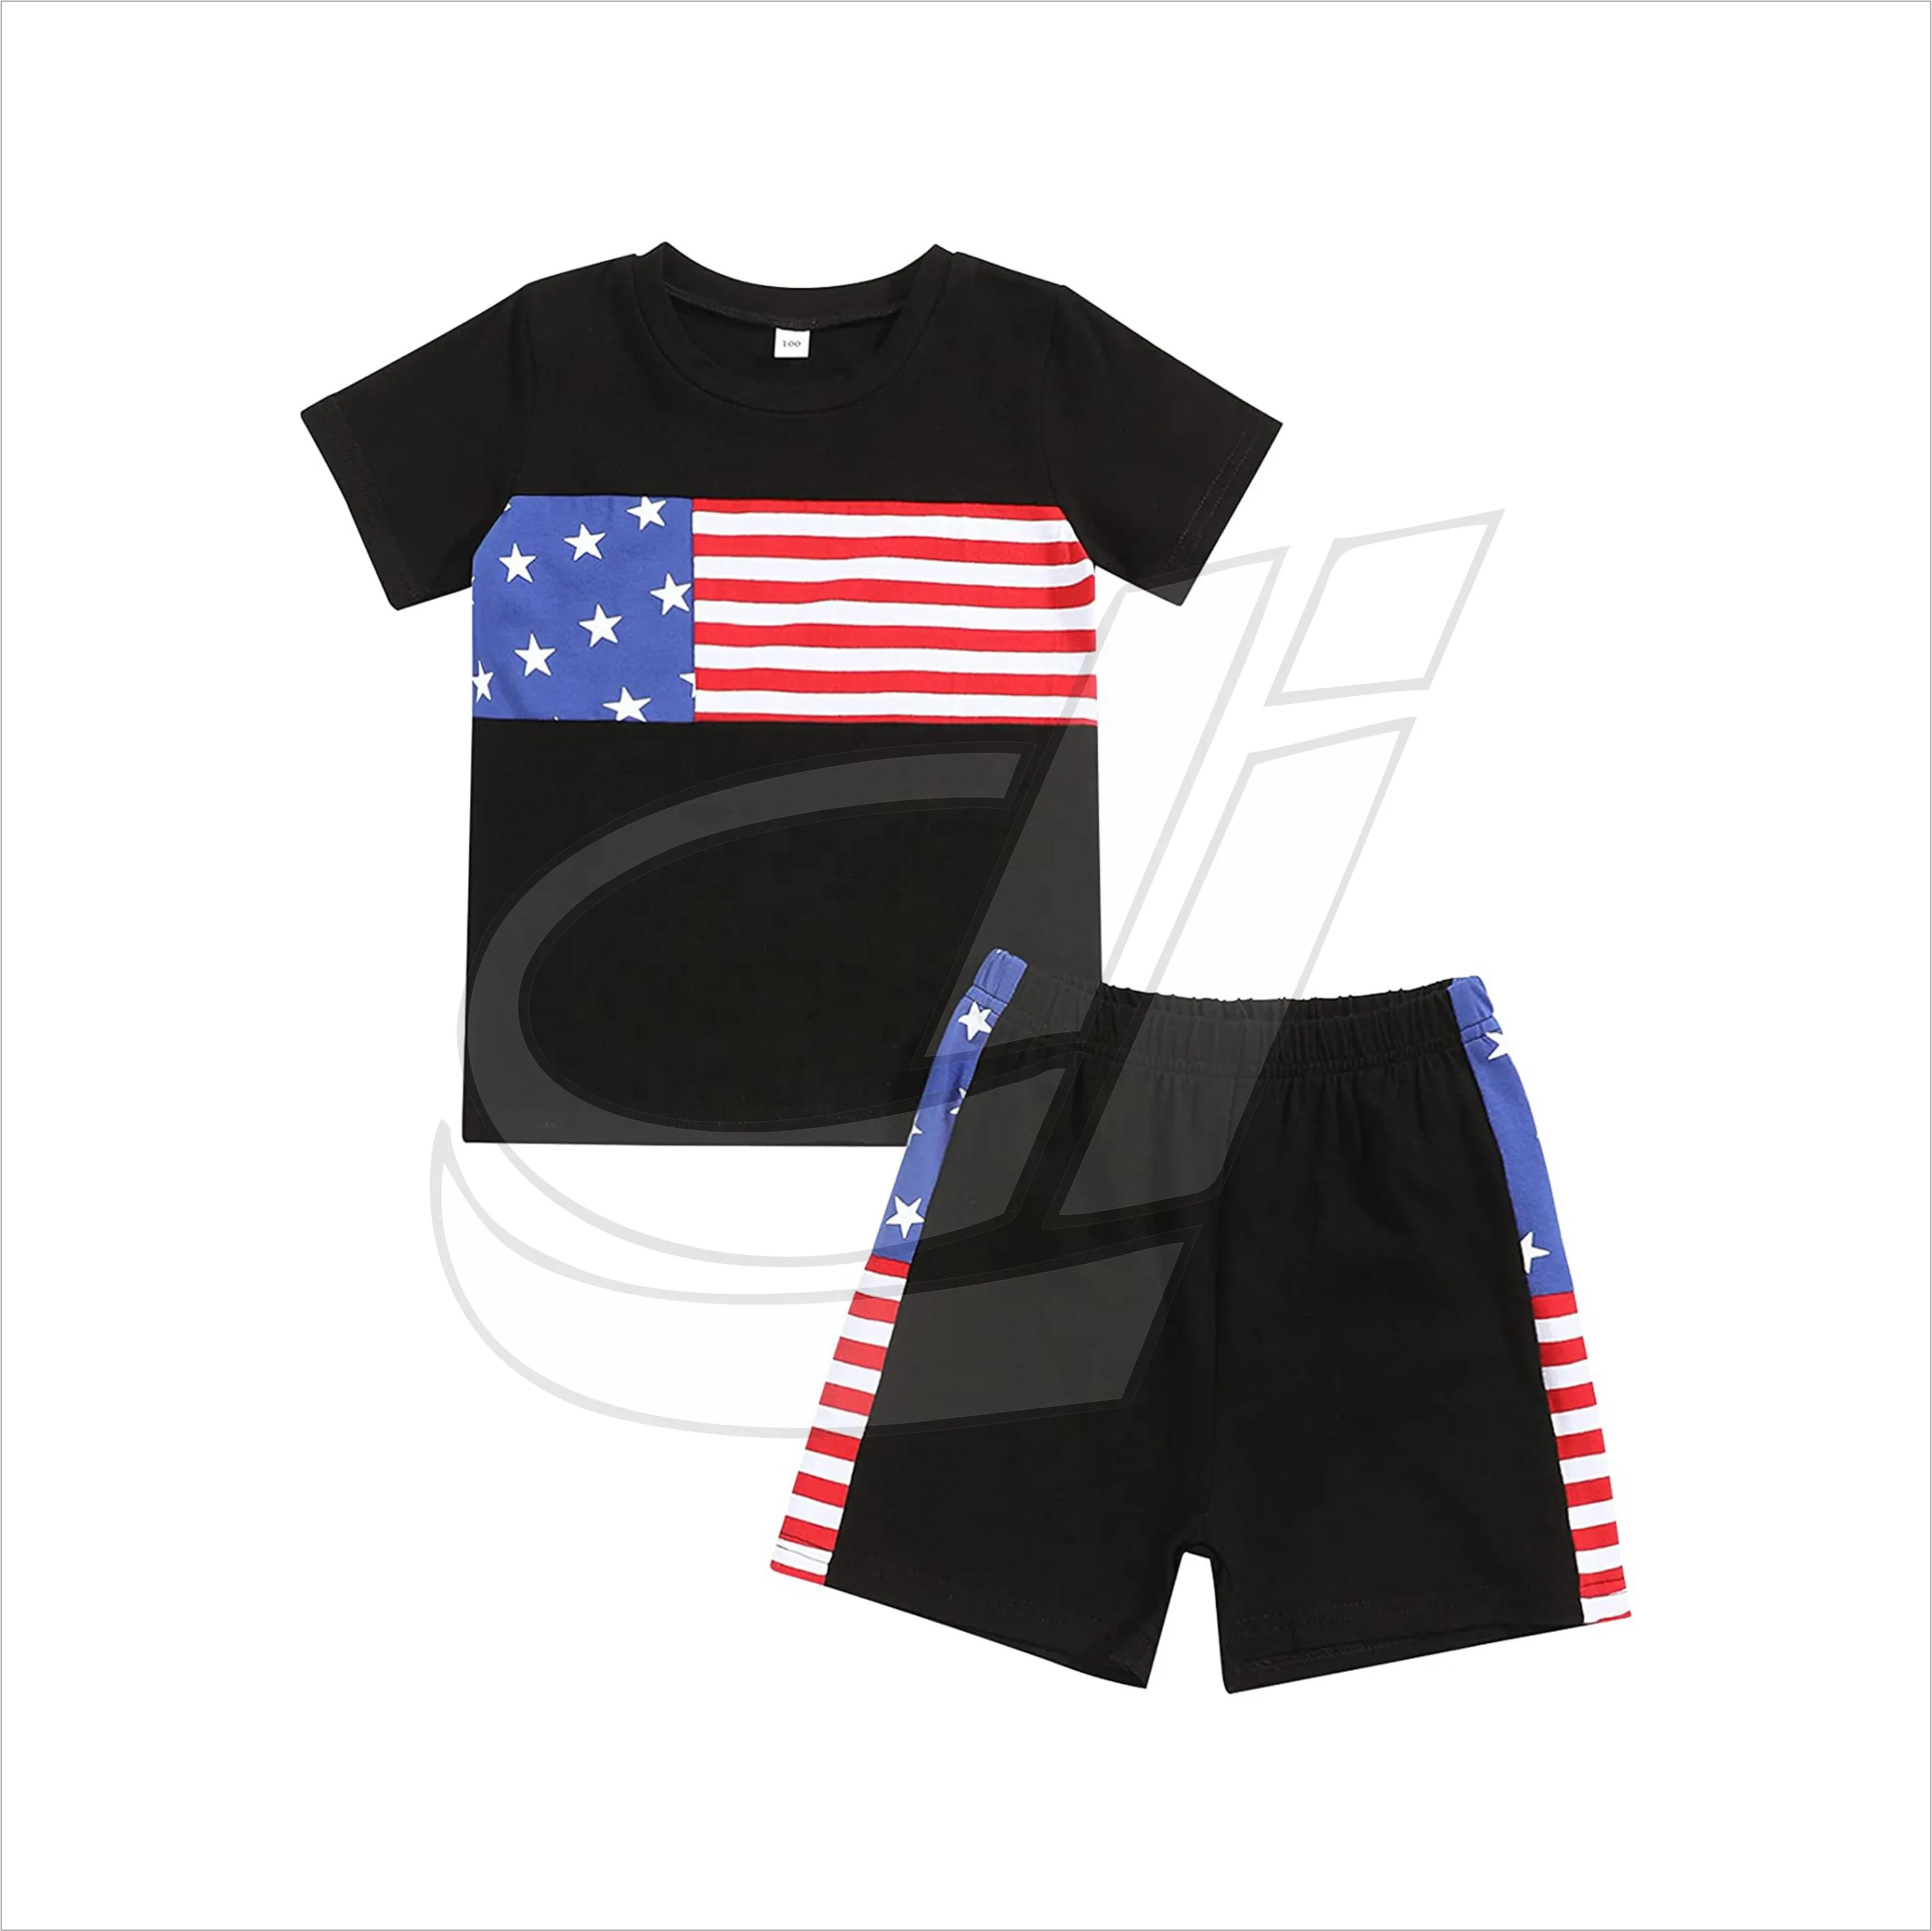 Kids Boys Clothing Set Children Clothes Short Sleeve T-shirt and Shorts Suit Flag Printed Sets Fashion USA Casual Summer Men